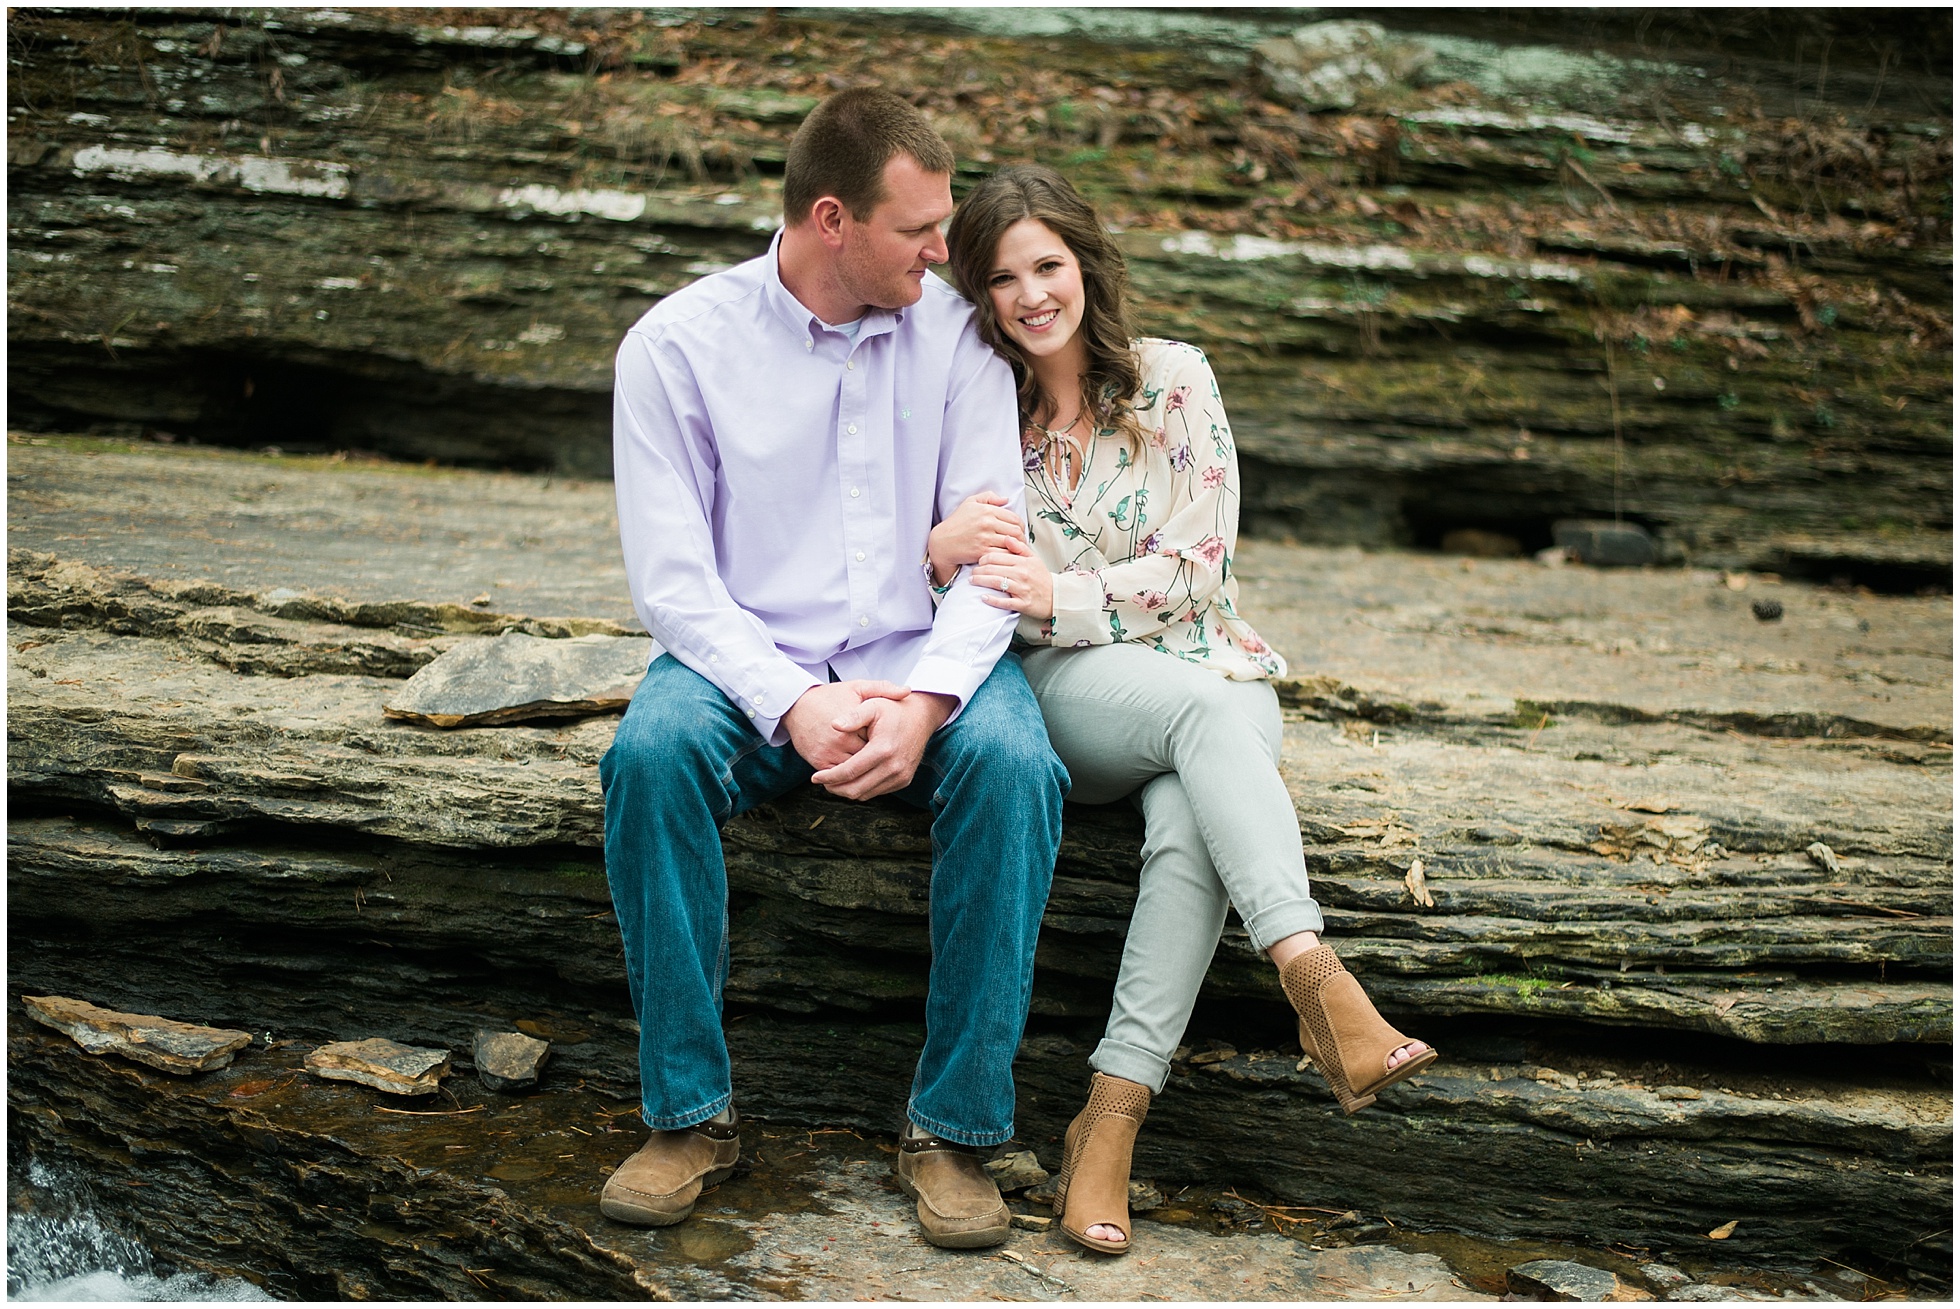 Emily & Dylan | Creek and Field Engagement Session | Birmingham, AL